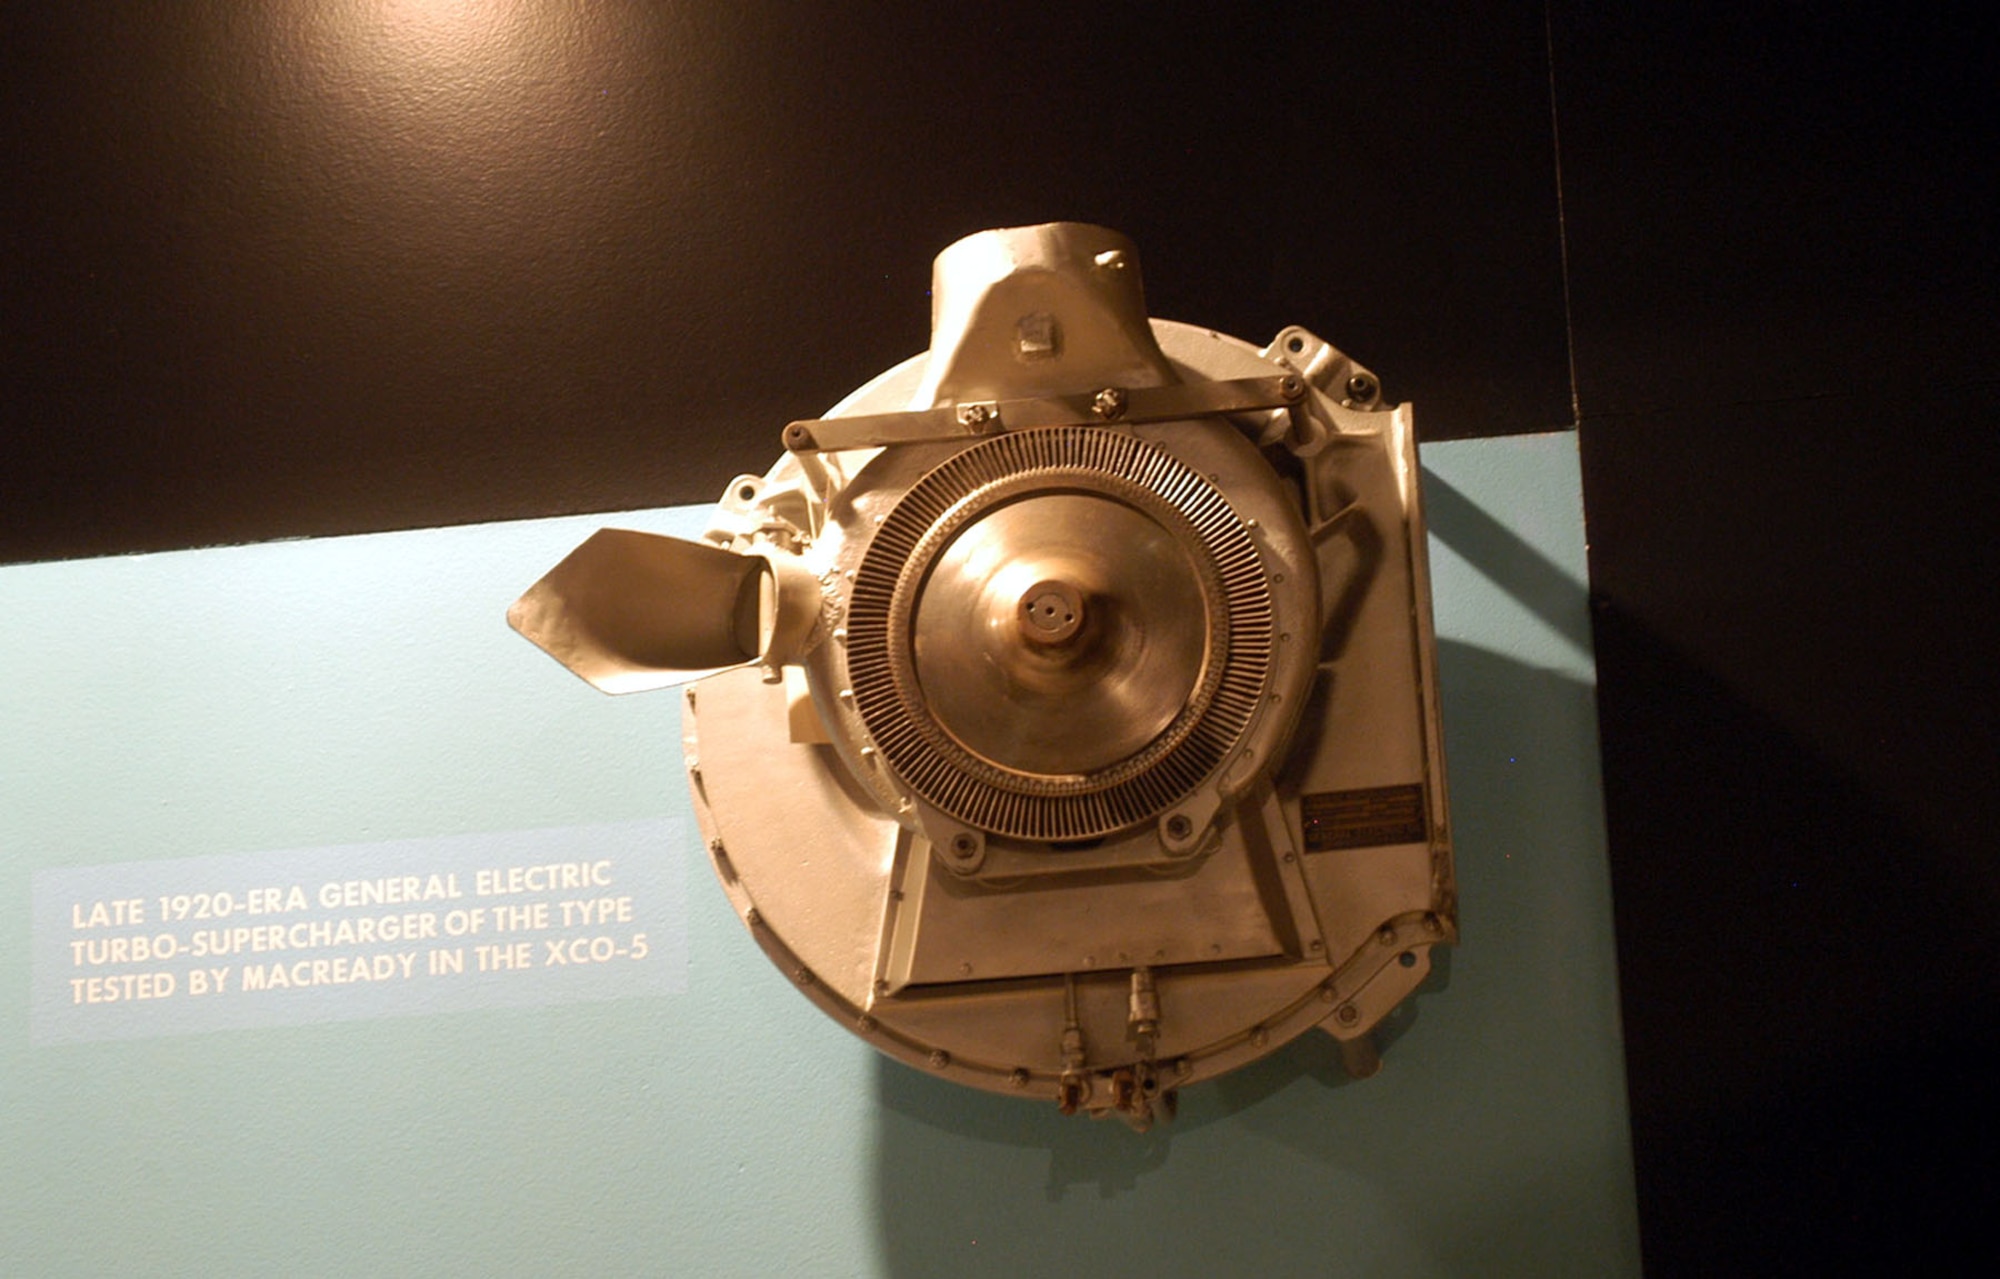 DAYTON, Ohio -- Late 1920s-era General Electric turbo-supercharger of the type tested by Lt. Macready in the XCO-5 on display in the Early Years Gallery at the National Museum of the United States Air Force. (U.S. Air Force photo)